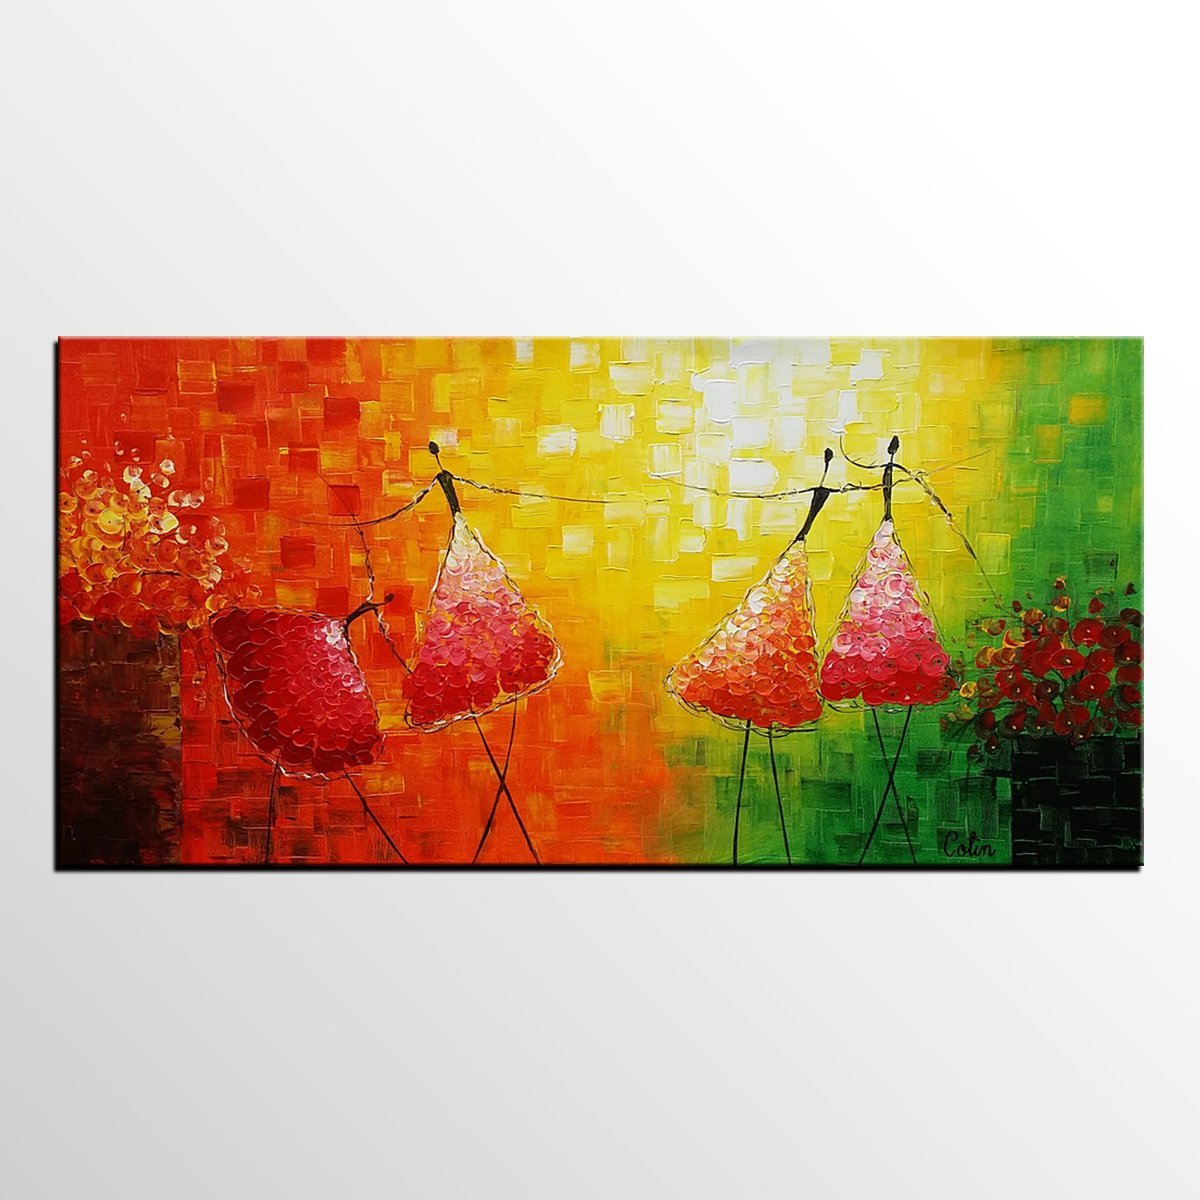 Simple Modern Painting, Paintings for Bedroom, Acrylic Art on Canvas, Abstract Ballet Dancer Painting, Original Wall Art, Acrylic Painting for Sale-ArtWorkCrafts.com